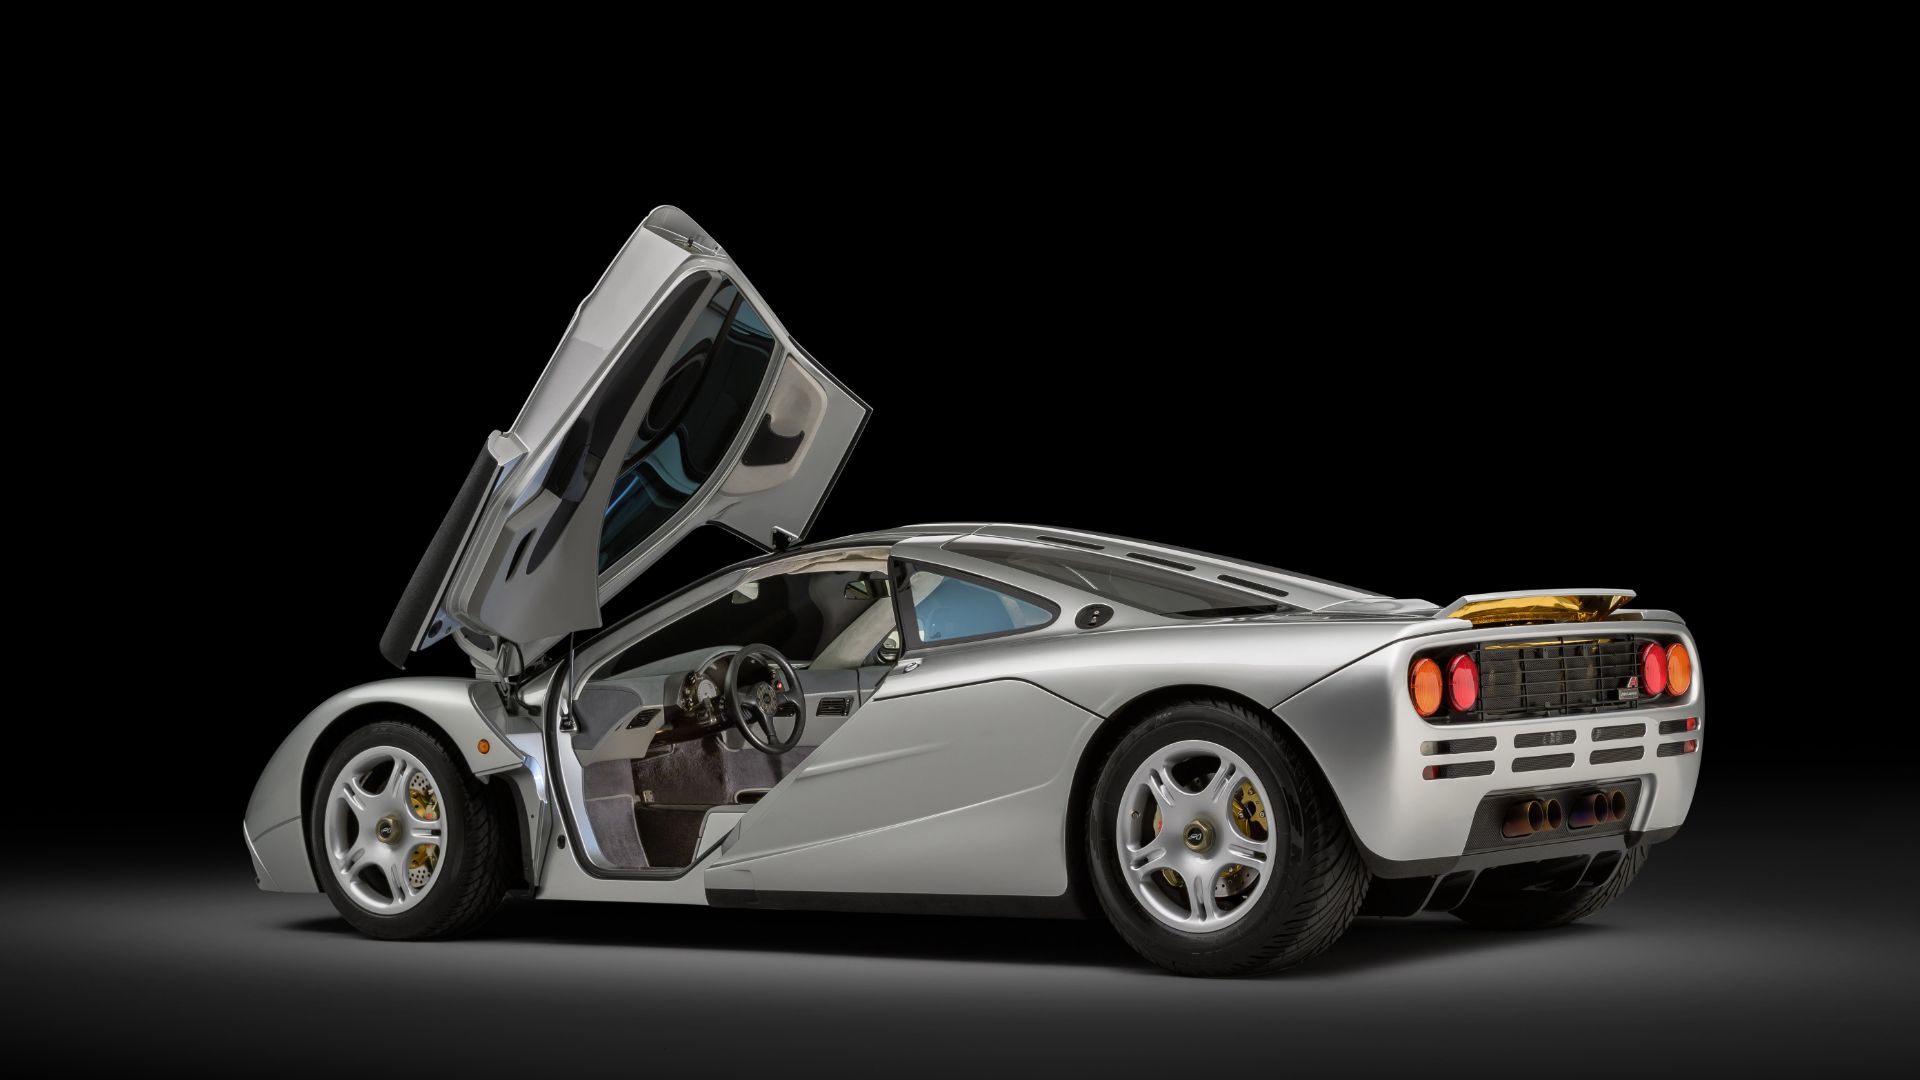 This is the world's most immaculate McLaren F1 - Motoring Research